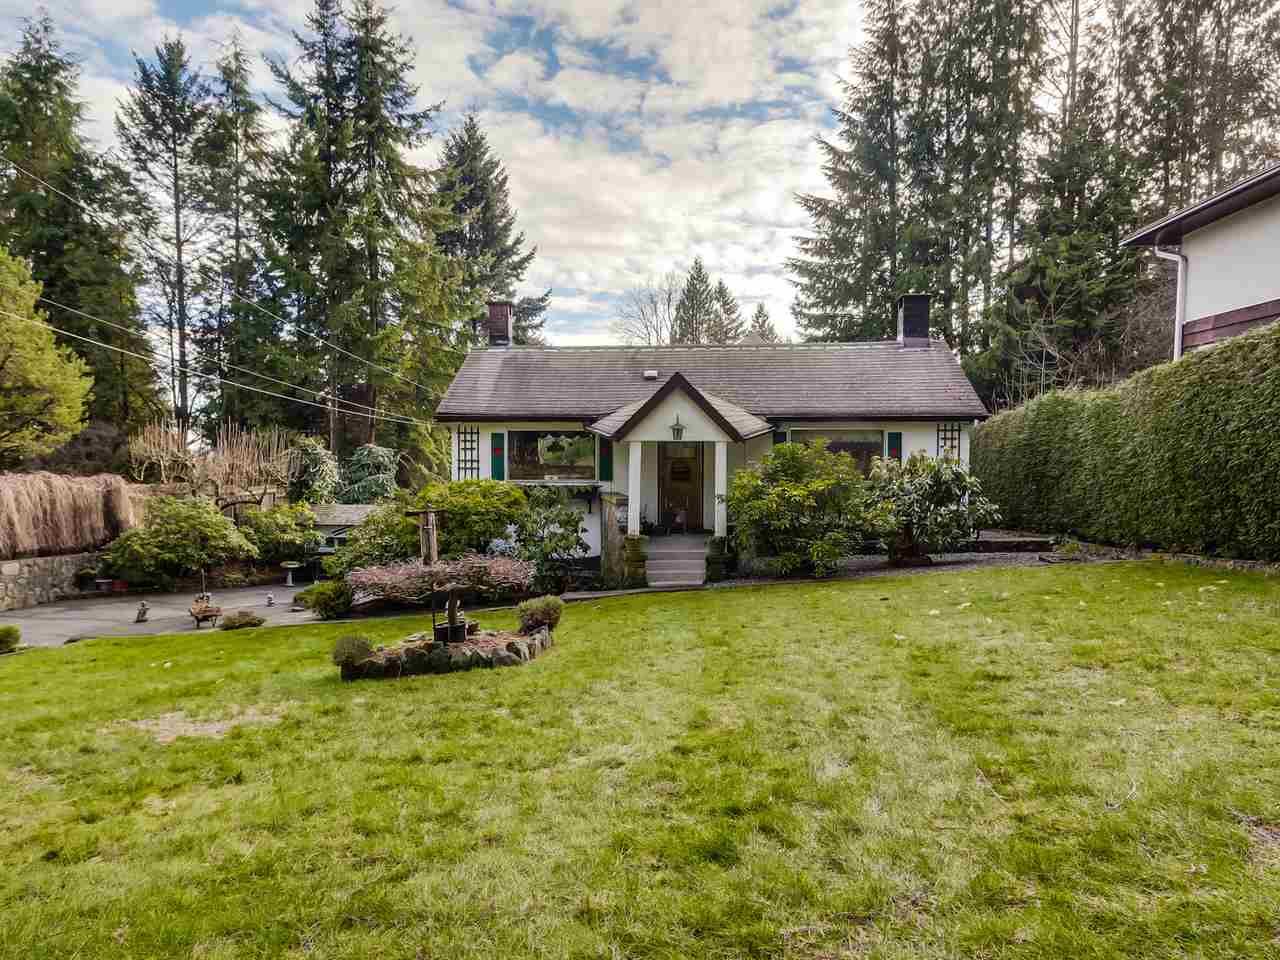 Main Photo: 1365 MILL STREET in : Lynn Valley House for sale : MLS®# R2023736